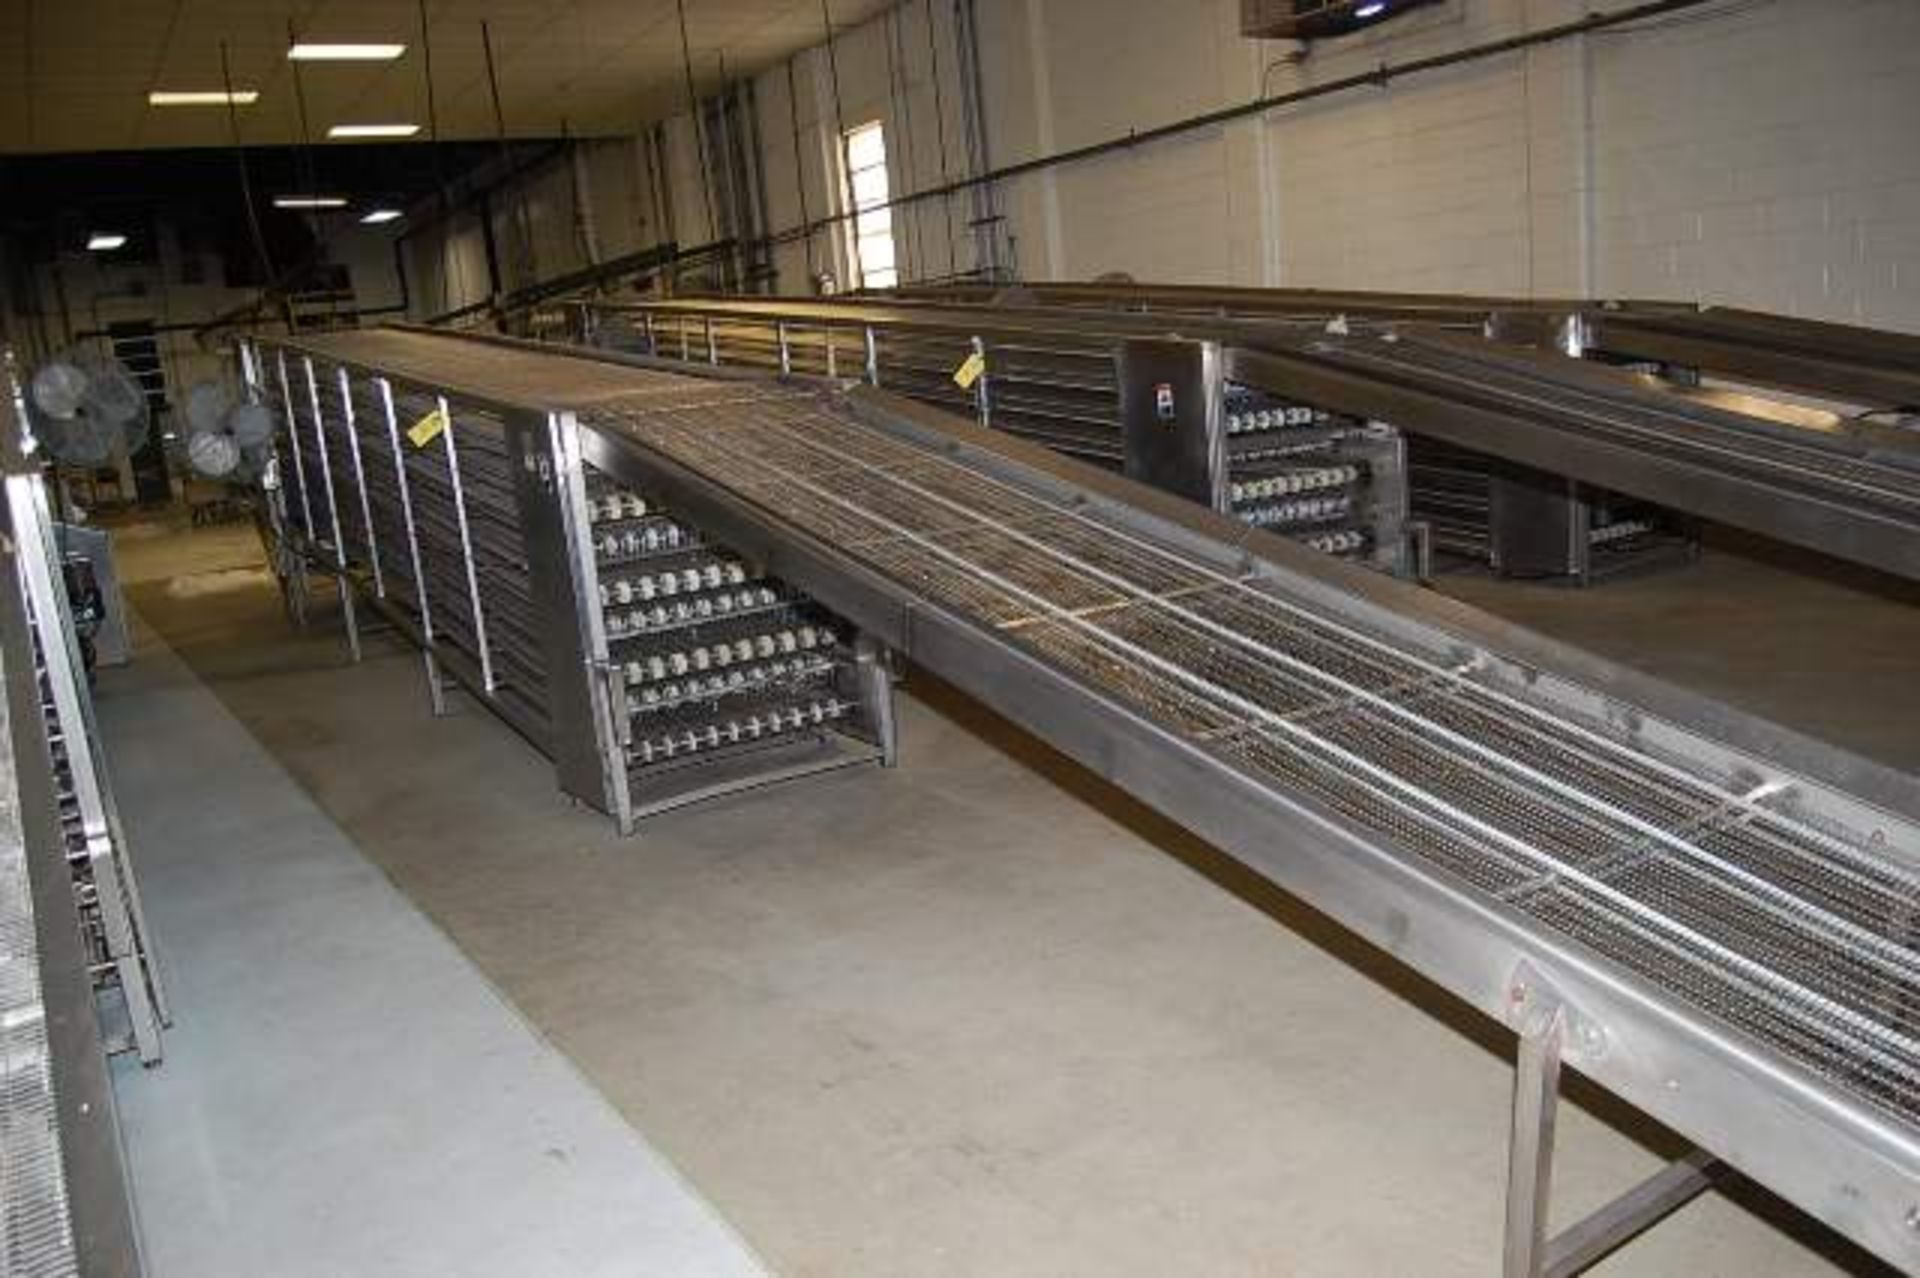 Lawrence 9-Tier Cooling Conveyor, SS Frame, Cooling Fans, 25 ft. Length, w/20 ft RIGGING FEE: $1500